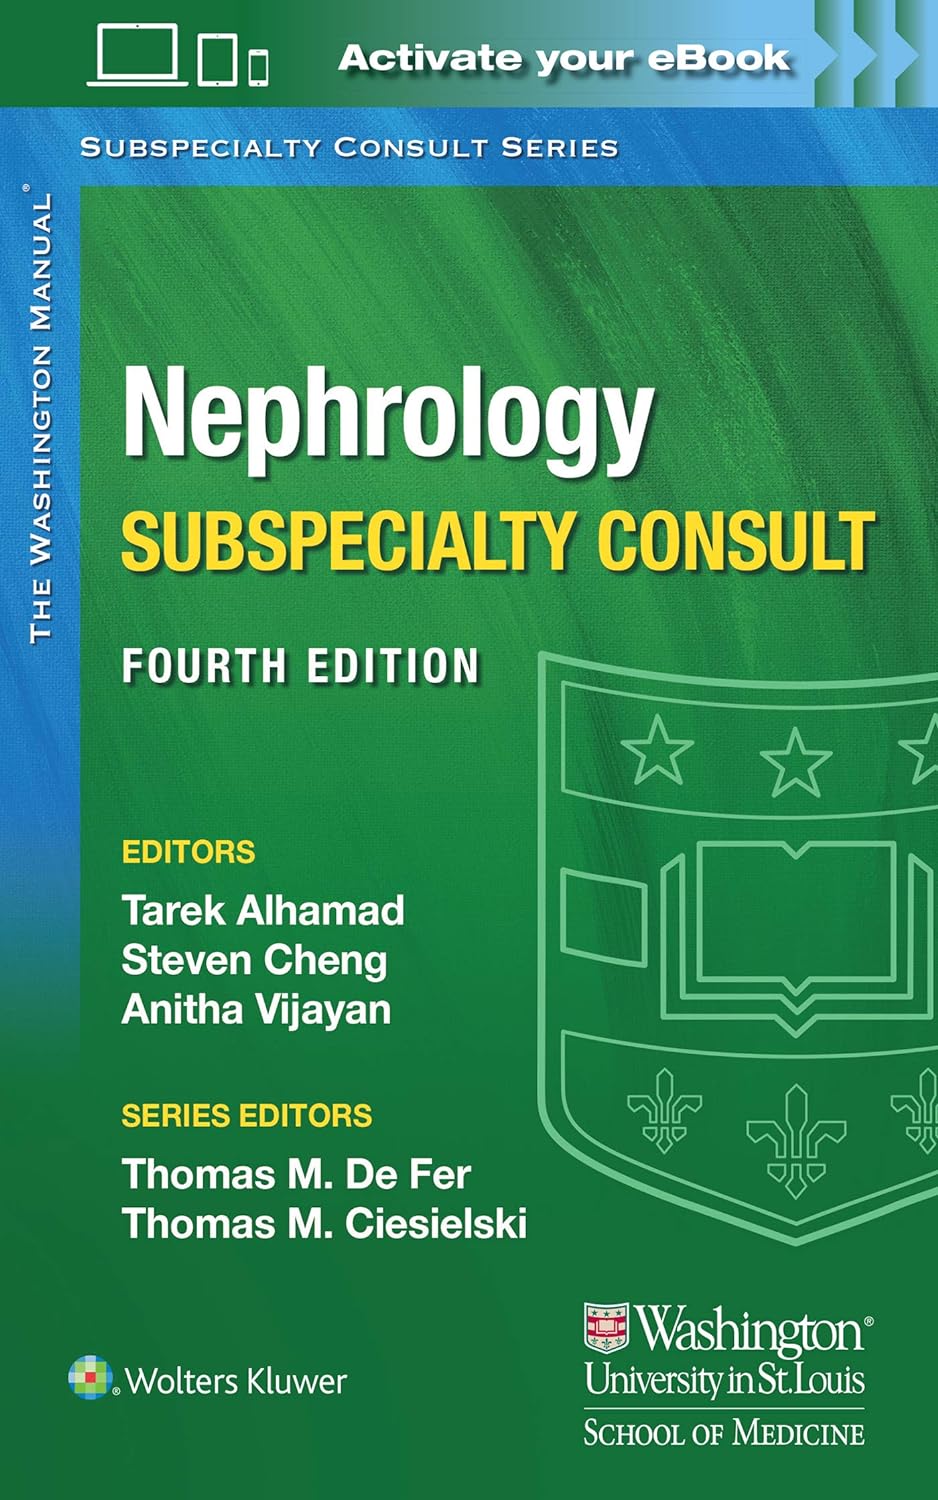 Washington Manual Nephrology Subspecialty Consult, 4th Edition  by Dr. Tarek Alhamad MD